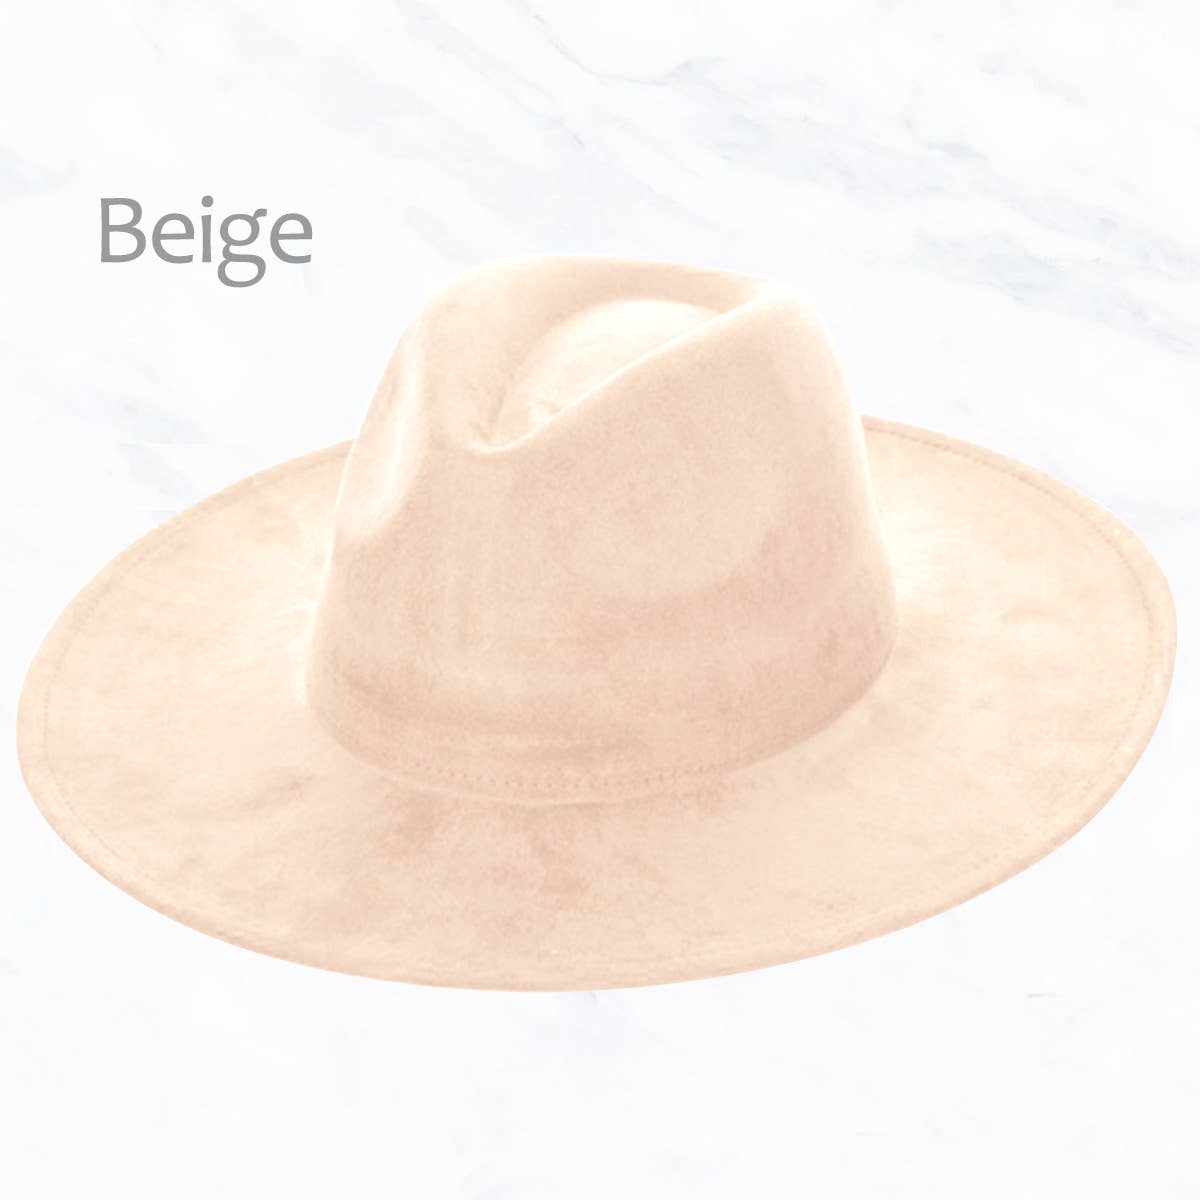 Suzie Q USA - Suede Large Eaves Peach Top Fedora Hat: Pastel Pink